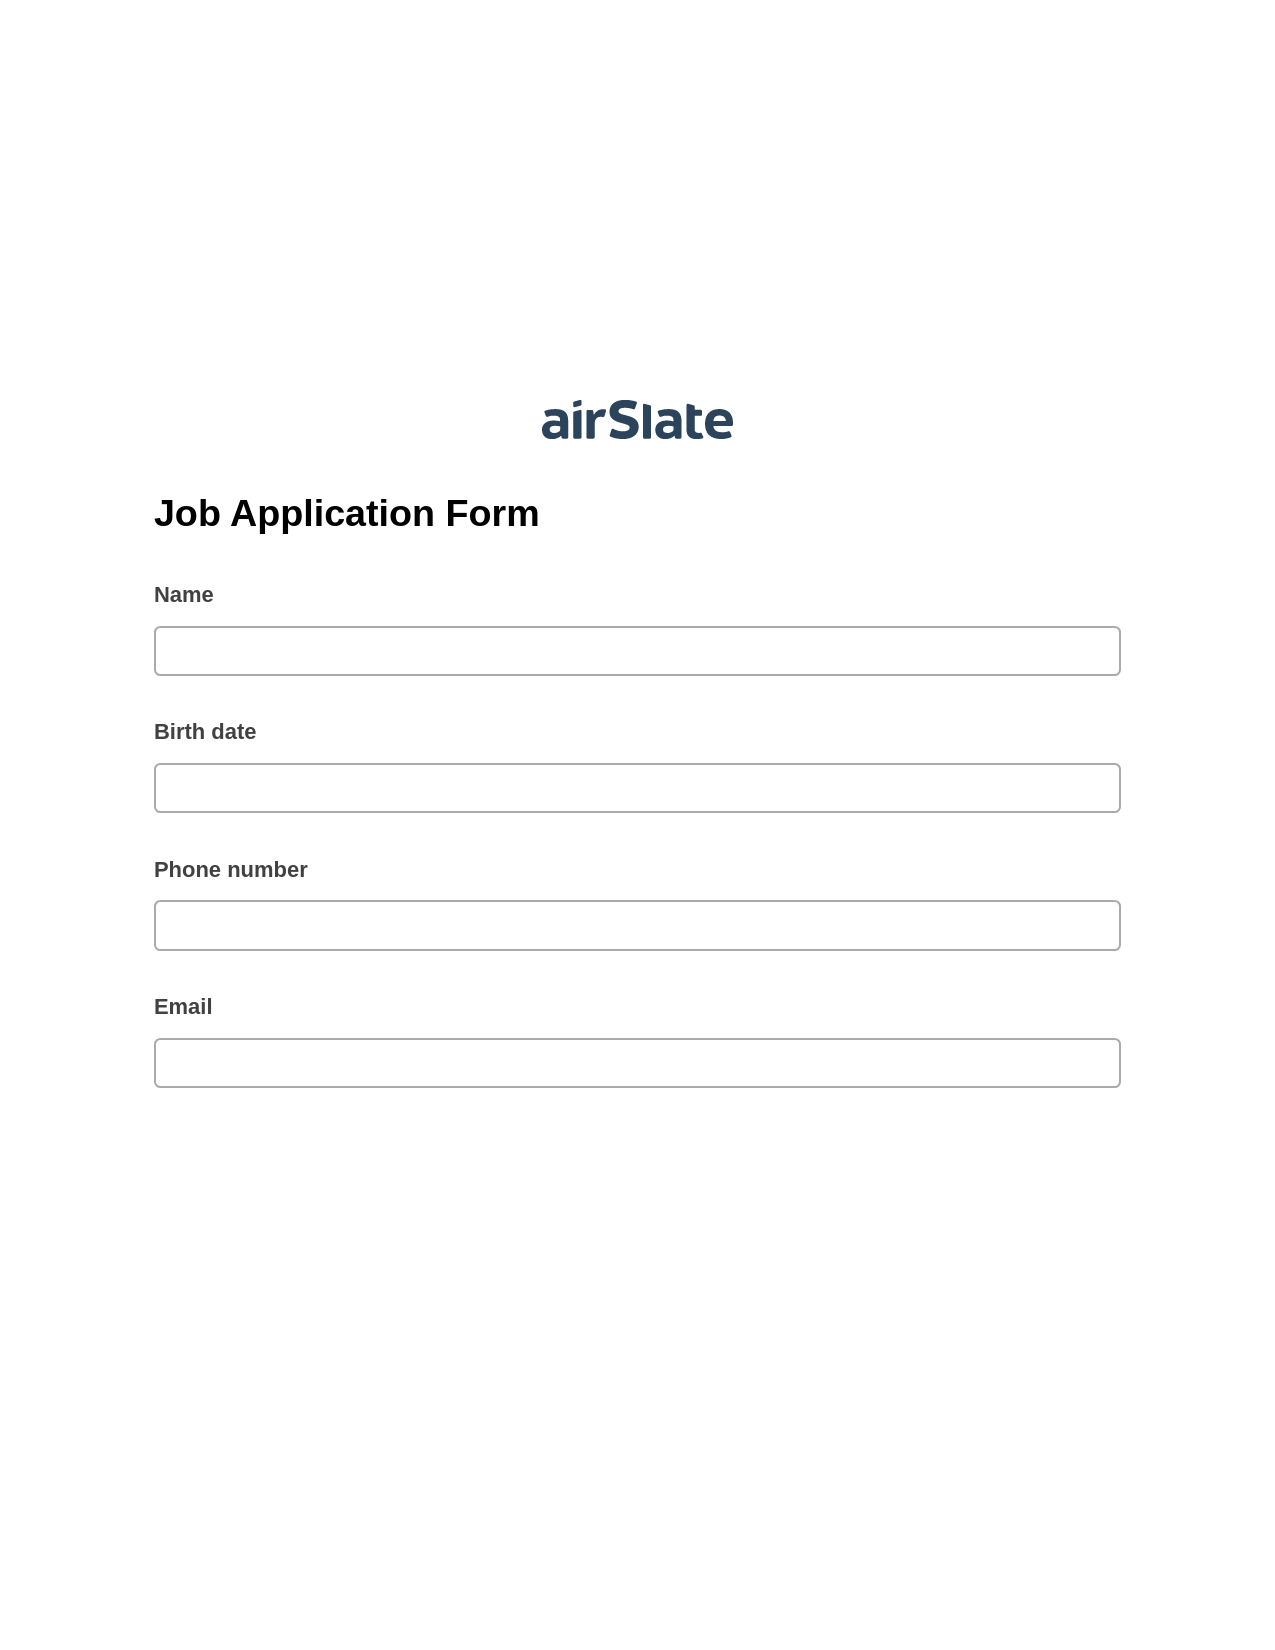 Multirole Job Application Form Pre-fill Dropdown from Airtable, Pre-fill with Custom Data Bot, Google Drive Bot